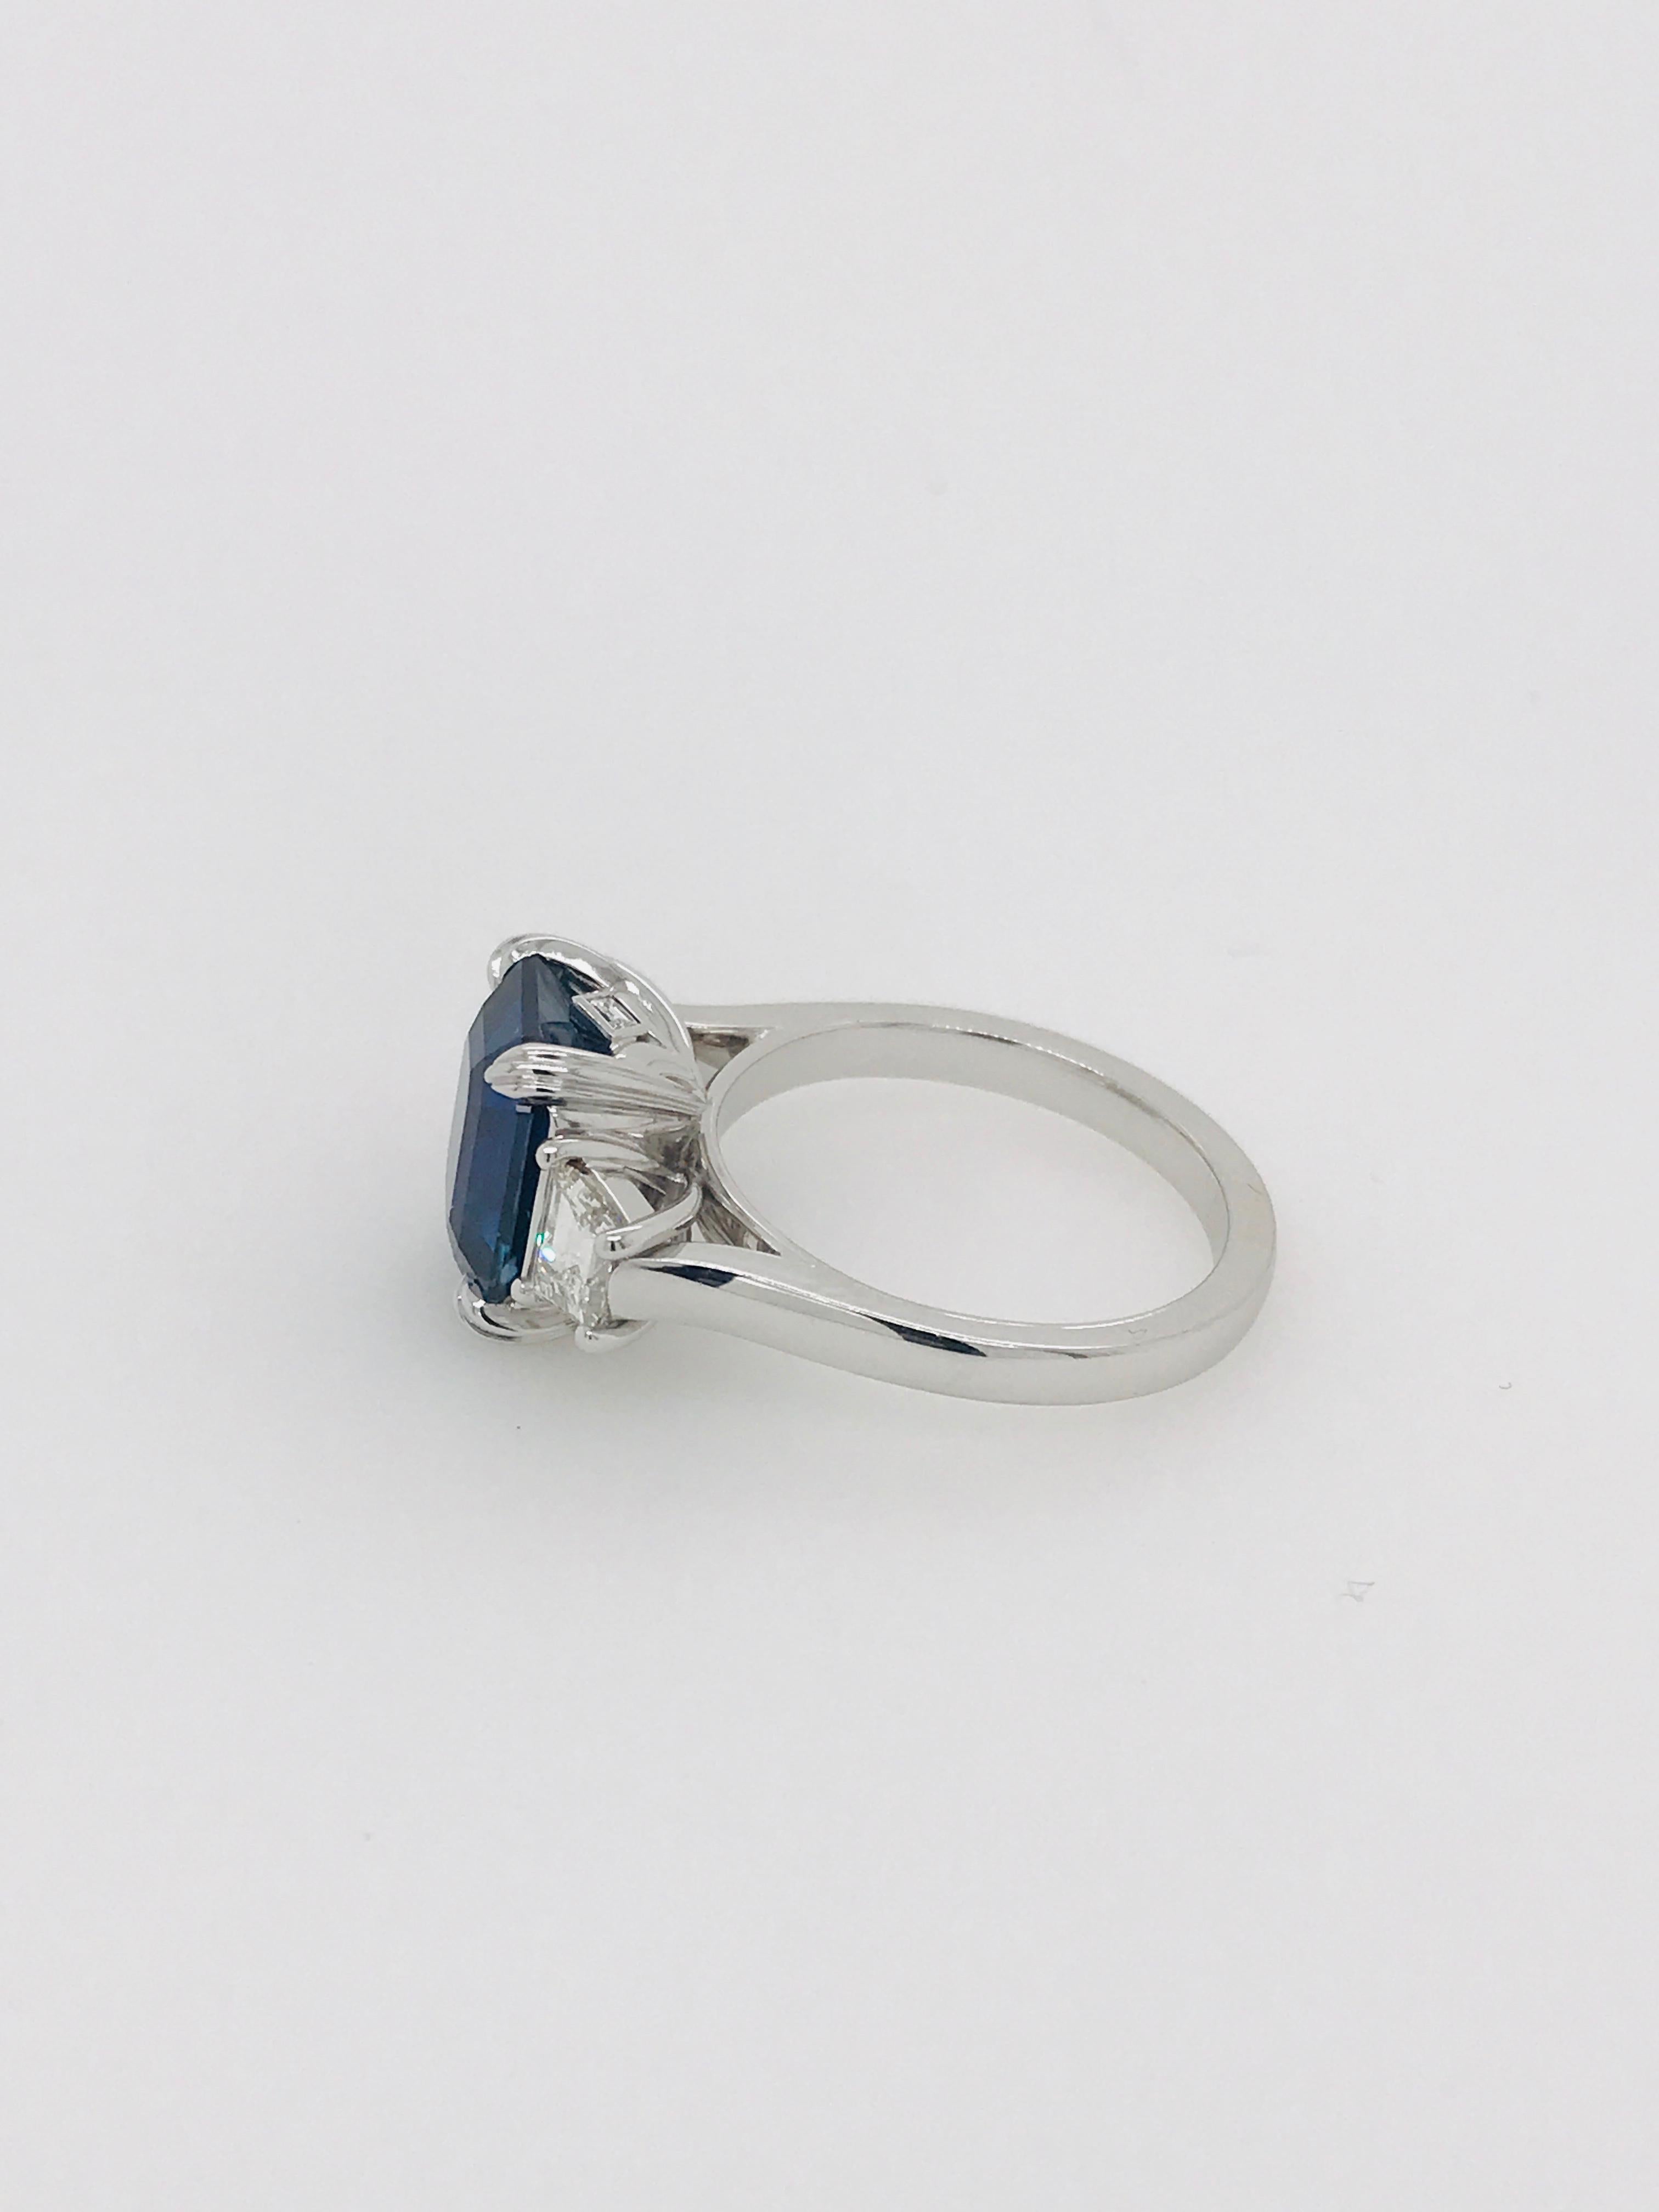 Modern 5.12 Carat Madagascan Sapphire and Trapezoid Diamond Ring in 18 Carat White Gold